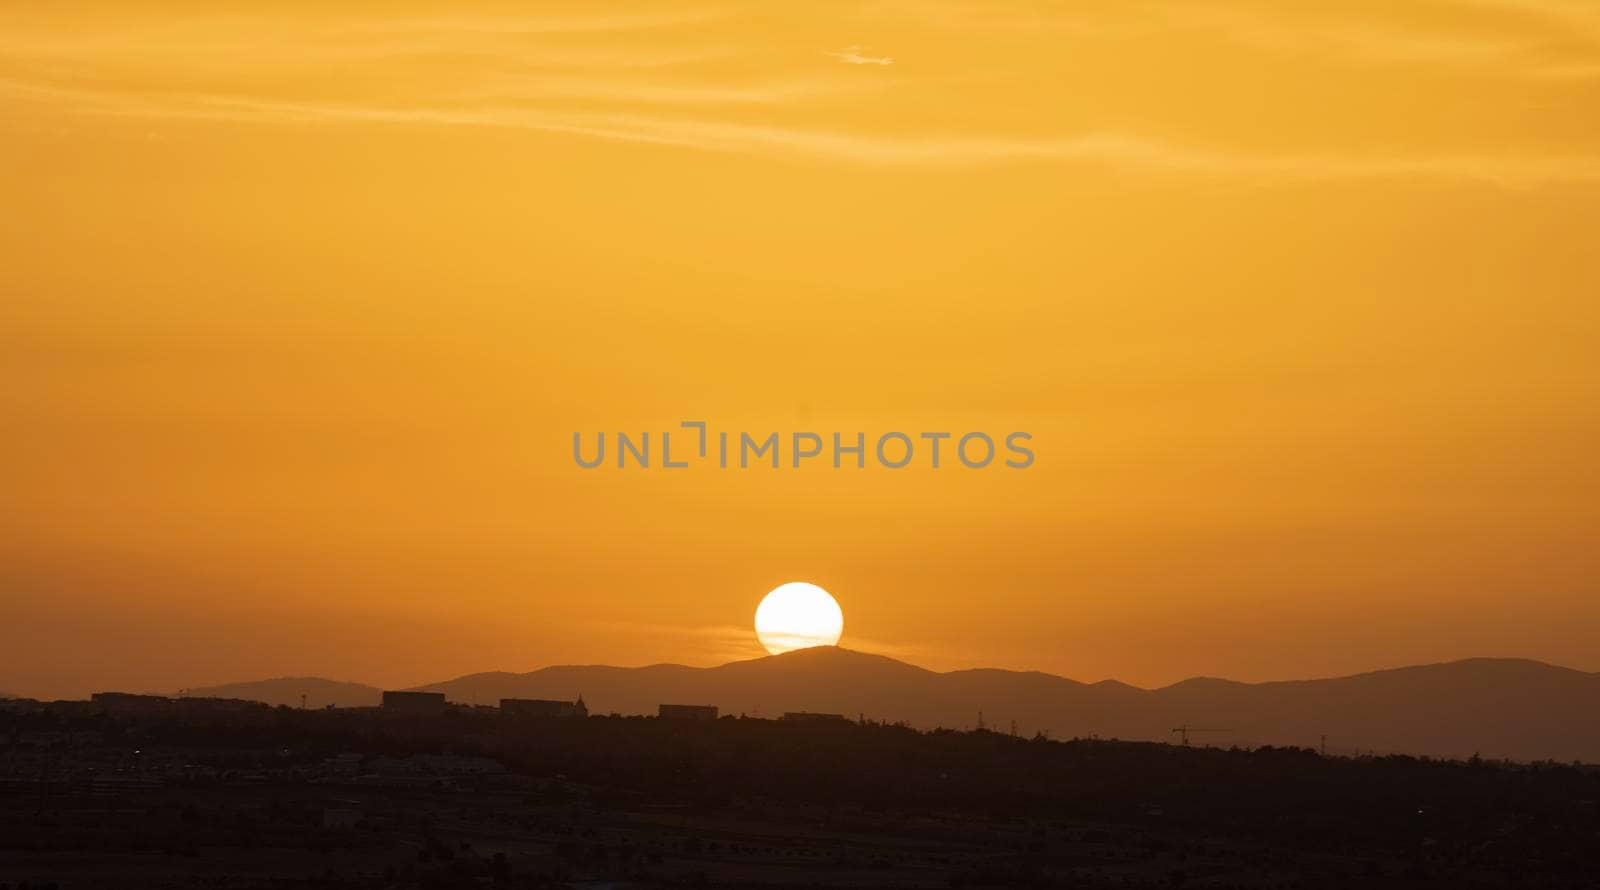 Big sun on sunset hiding behind mountains. Golden coloured sky. Copy space by papatonic